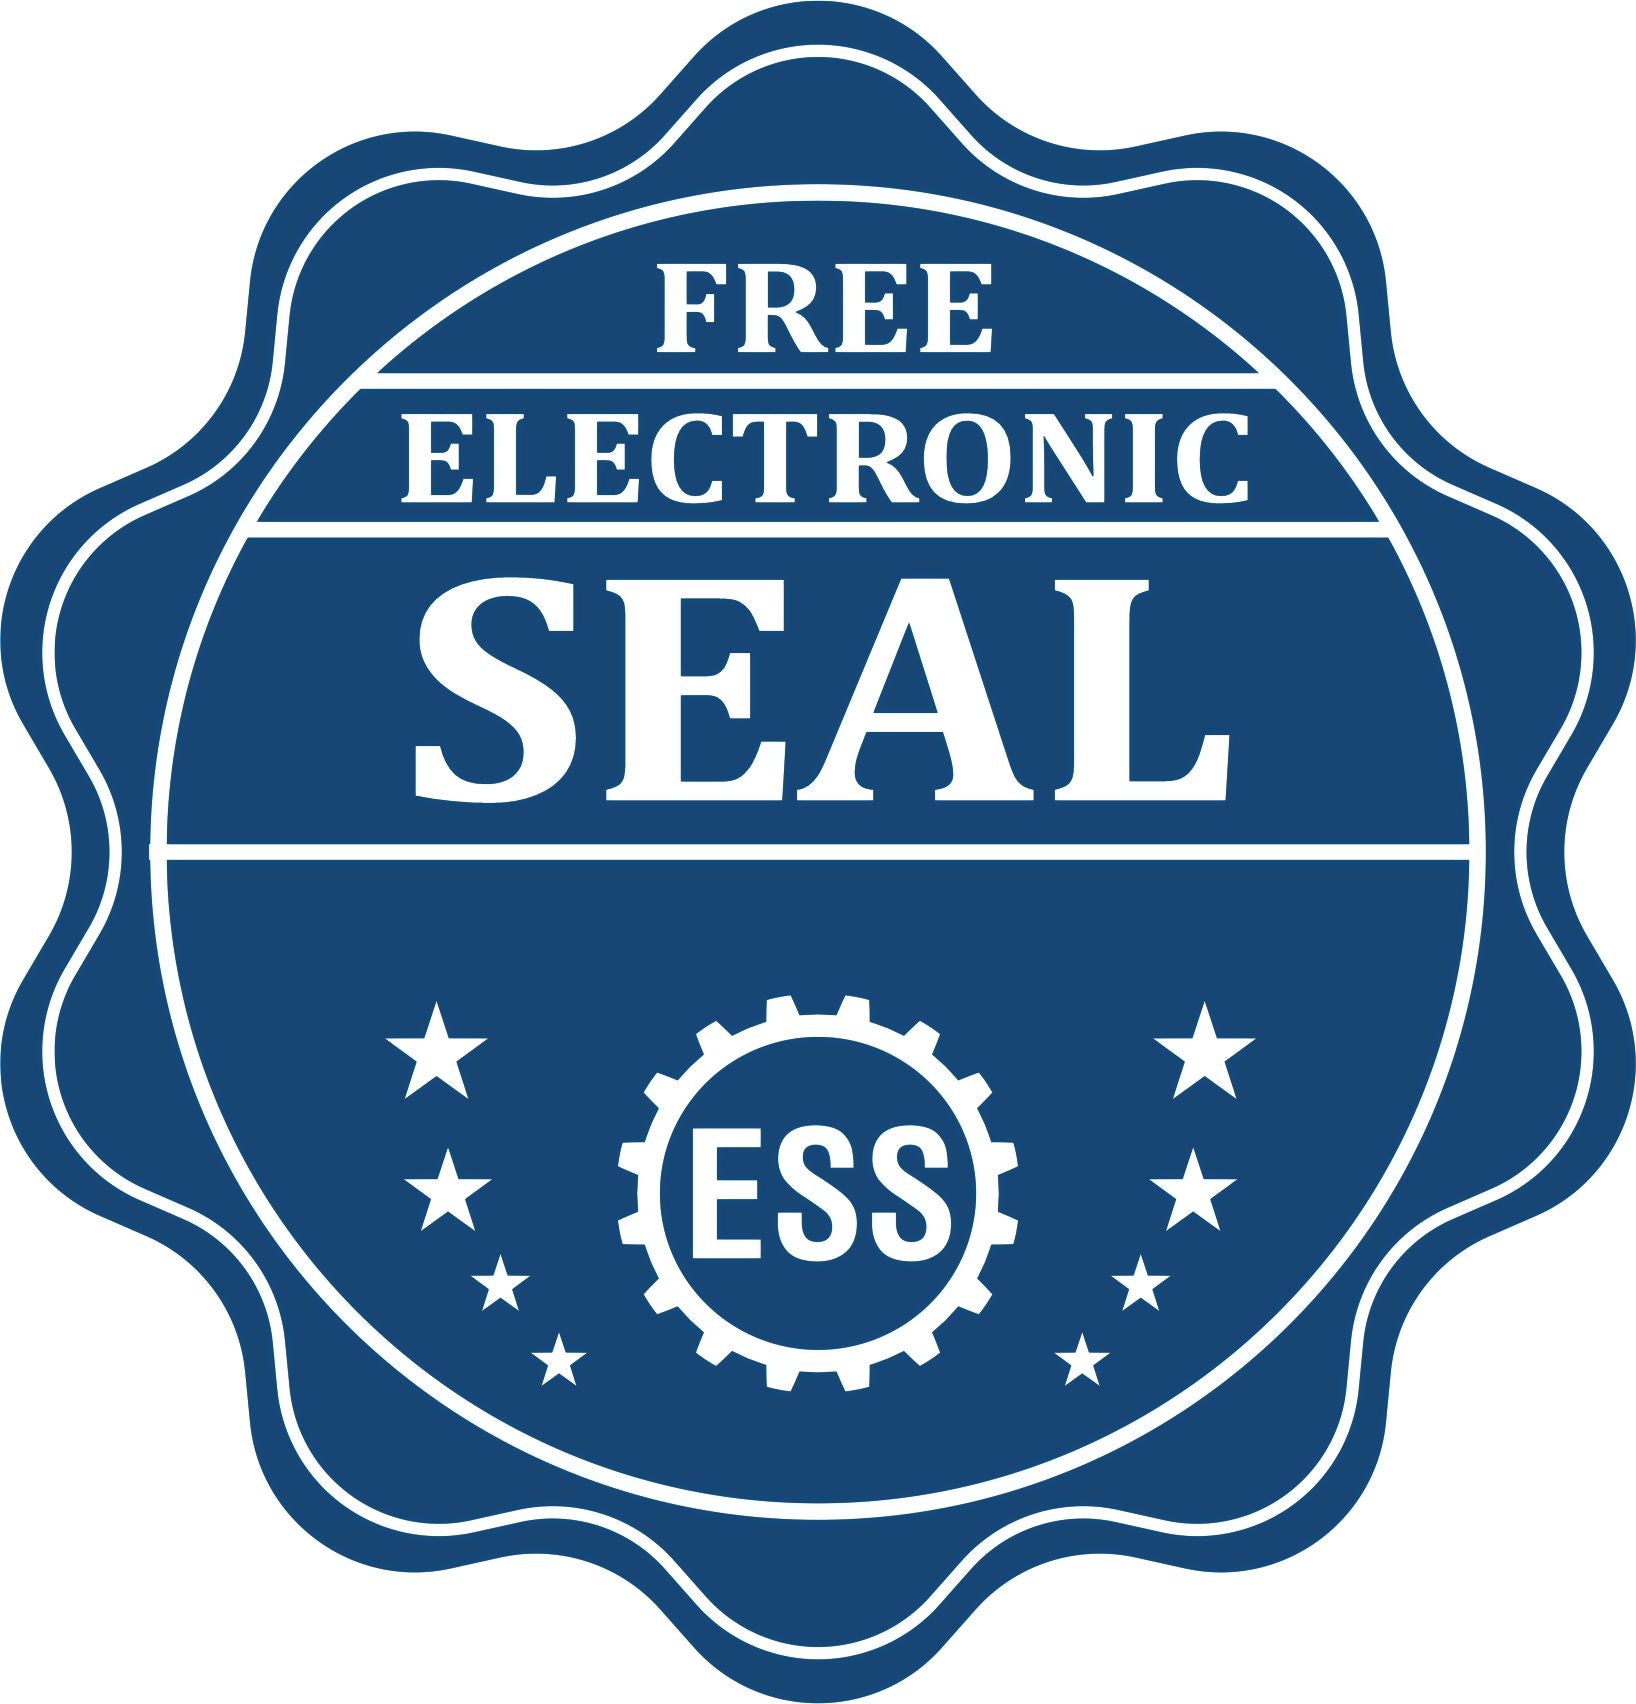 A badge showing a free electronic seal for the Heavy Duty Kentucky Landscape Architect Cast Iron Embosser with stars and the ESS gear on the emblem.